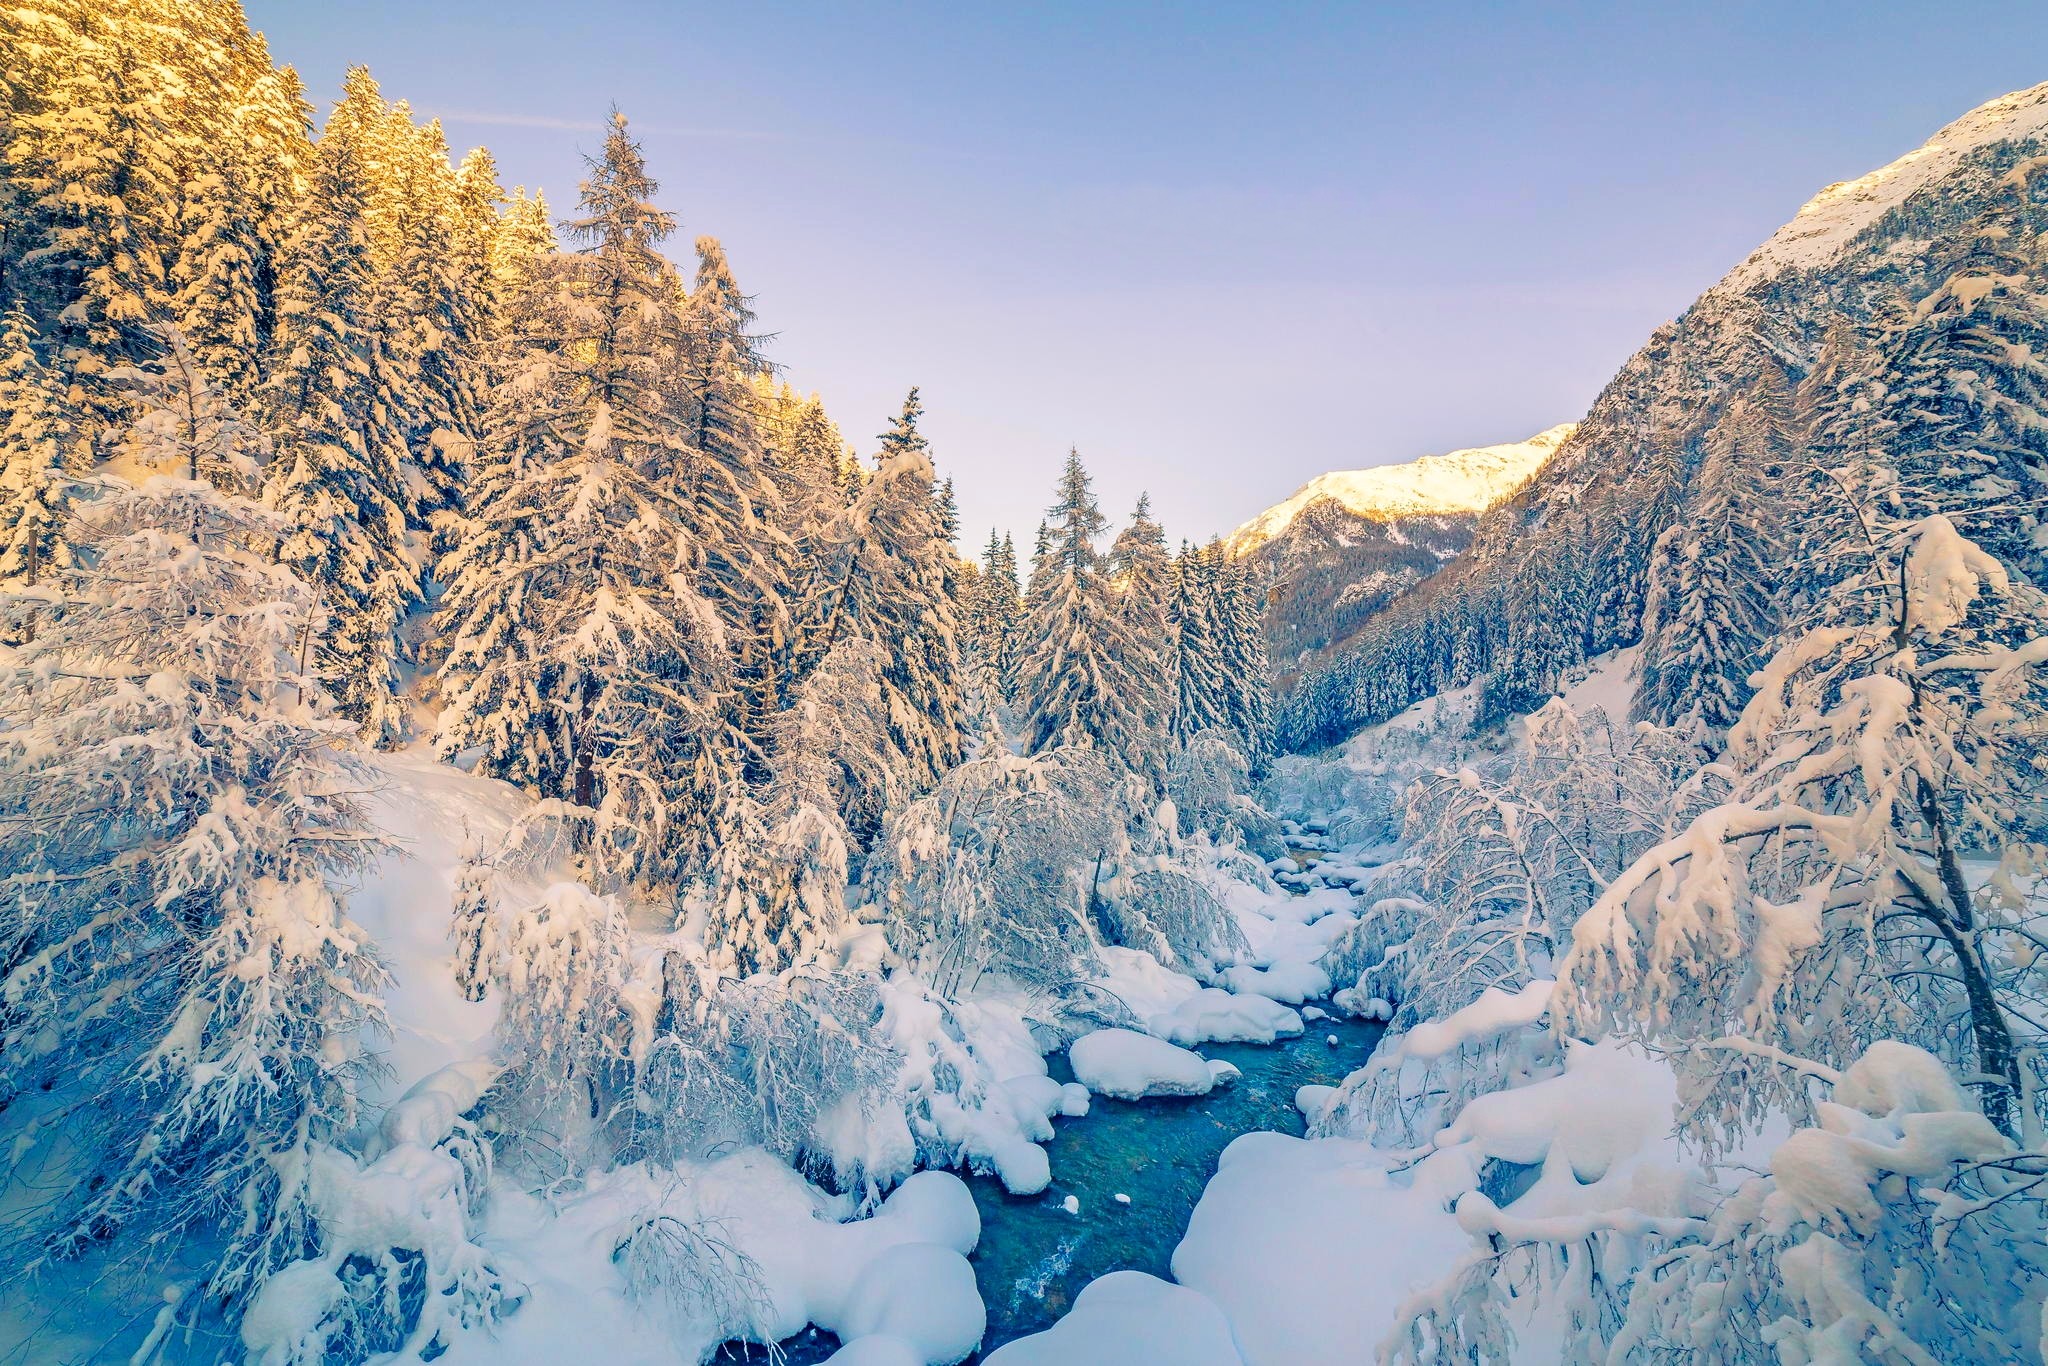 General 2048x1366 Alps winter mountains forest snow river white landscape nature